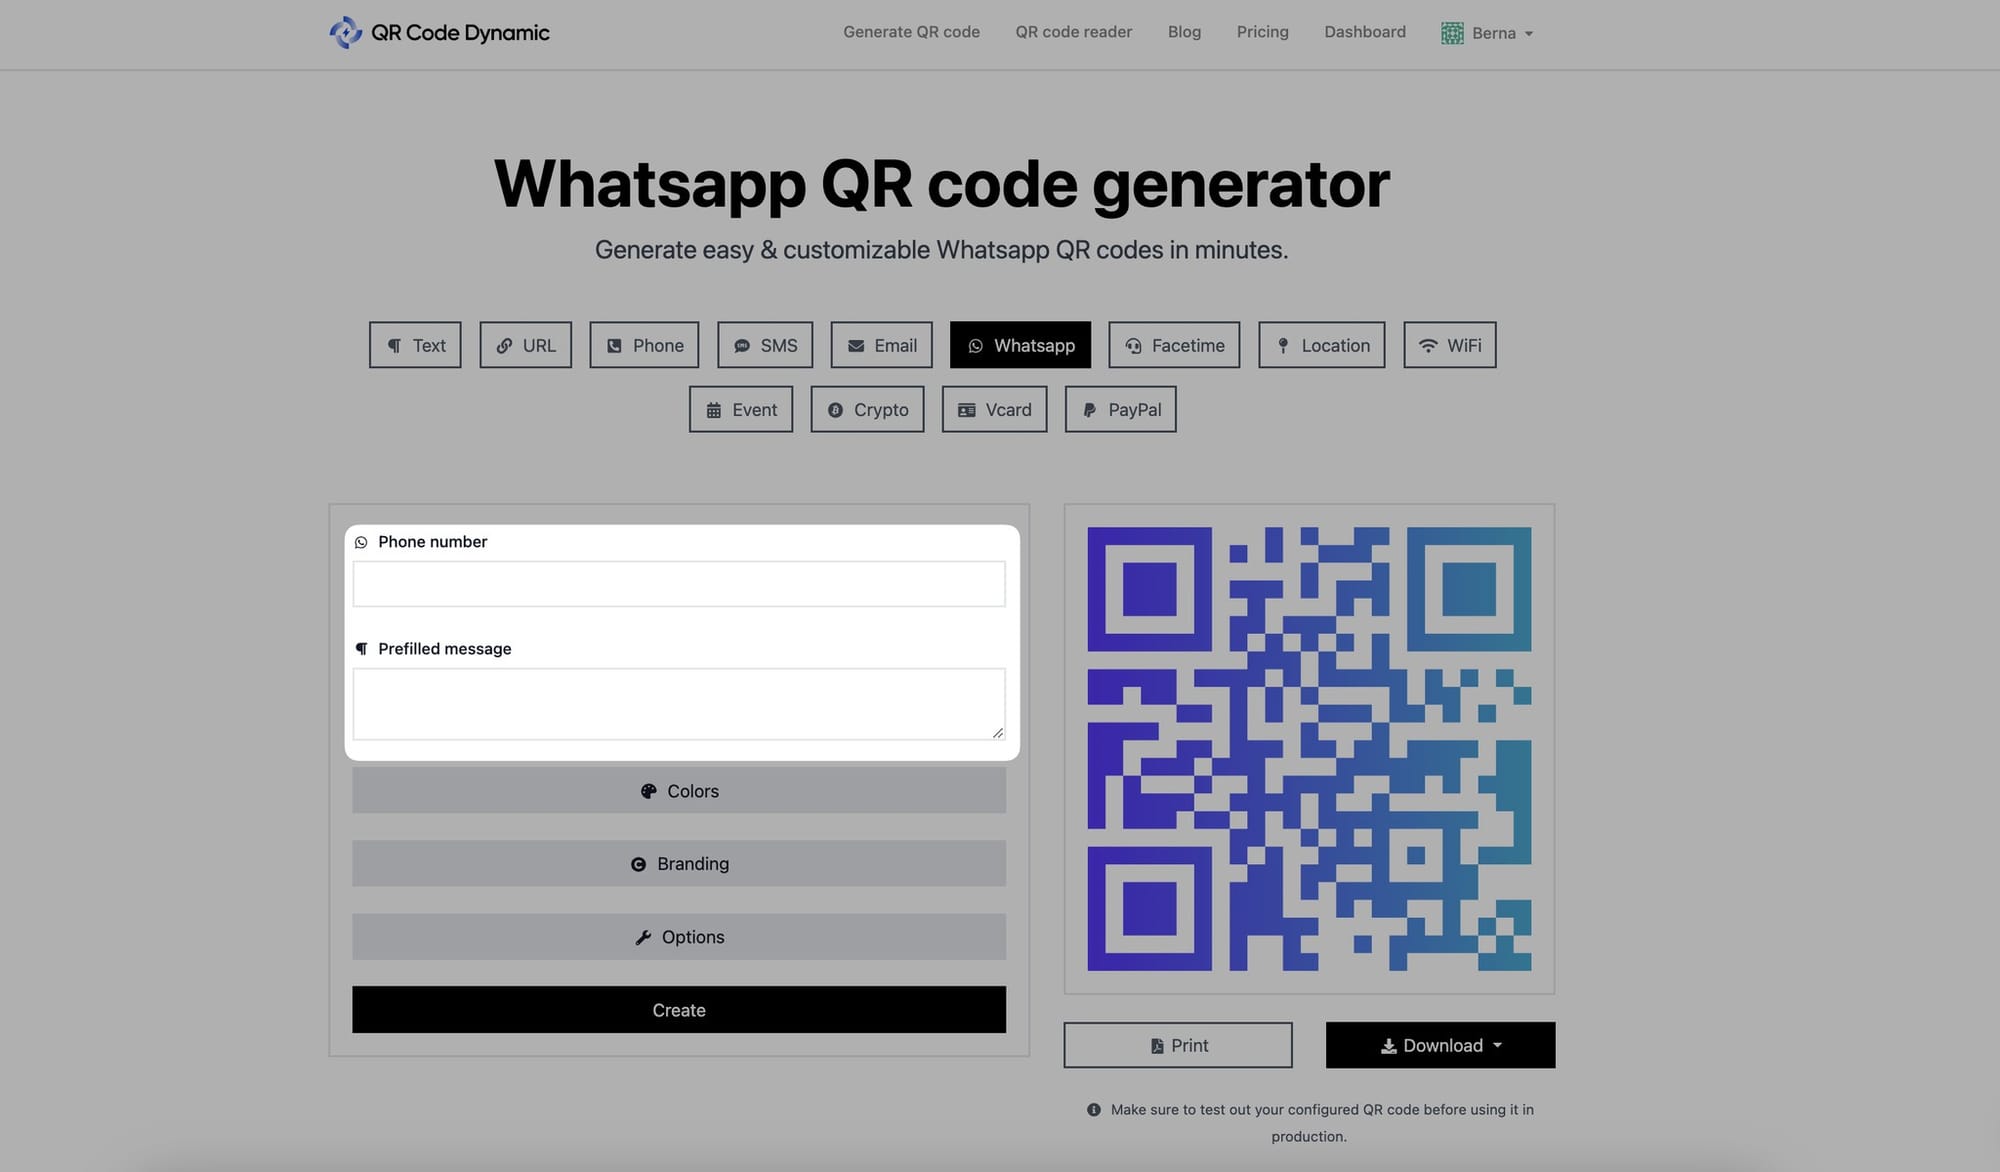 entering phone number and prefilled message to whatsapp qr code